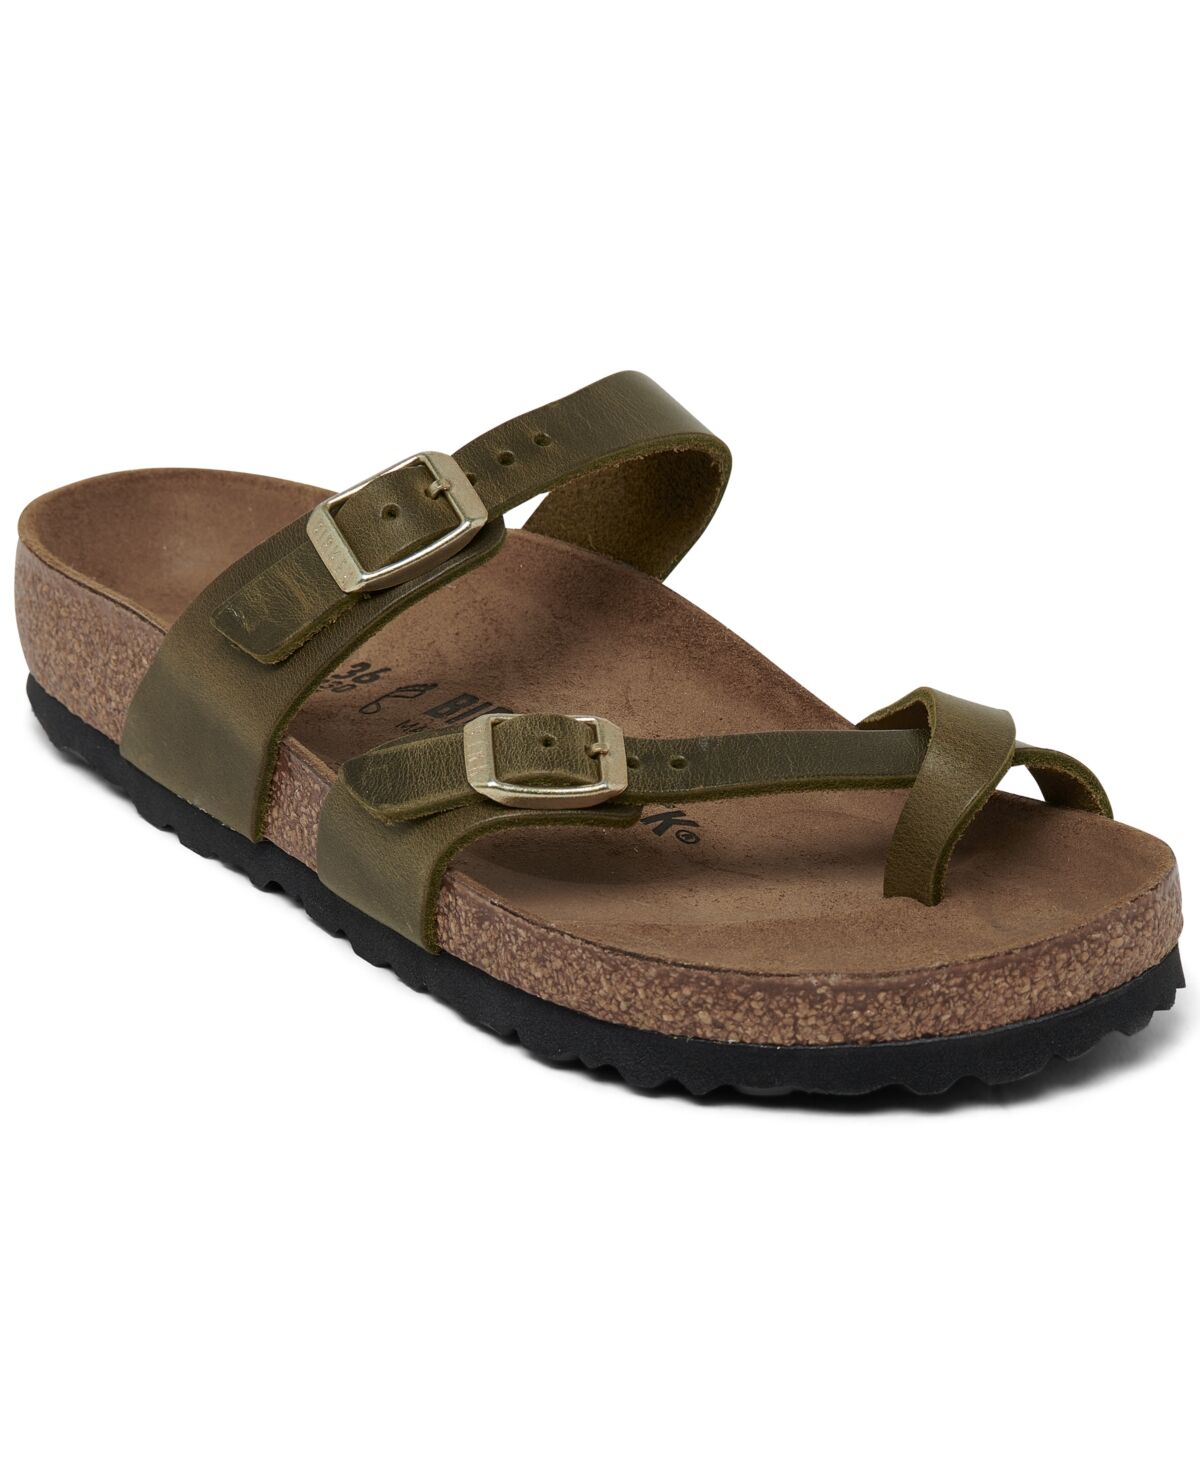 Birkenstock Women's Mayari Oiled Leather Sandals from Finish Line - Olive Green